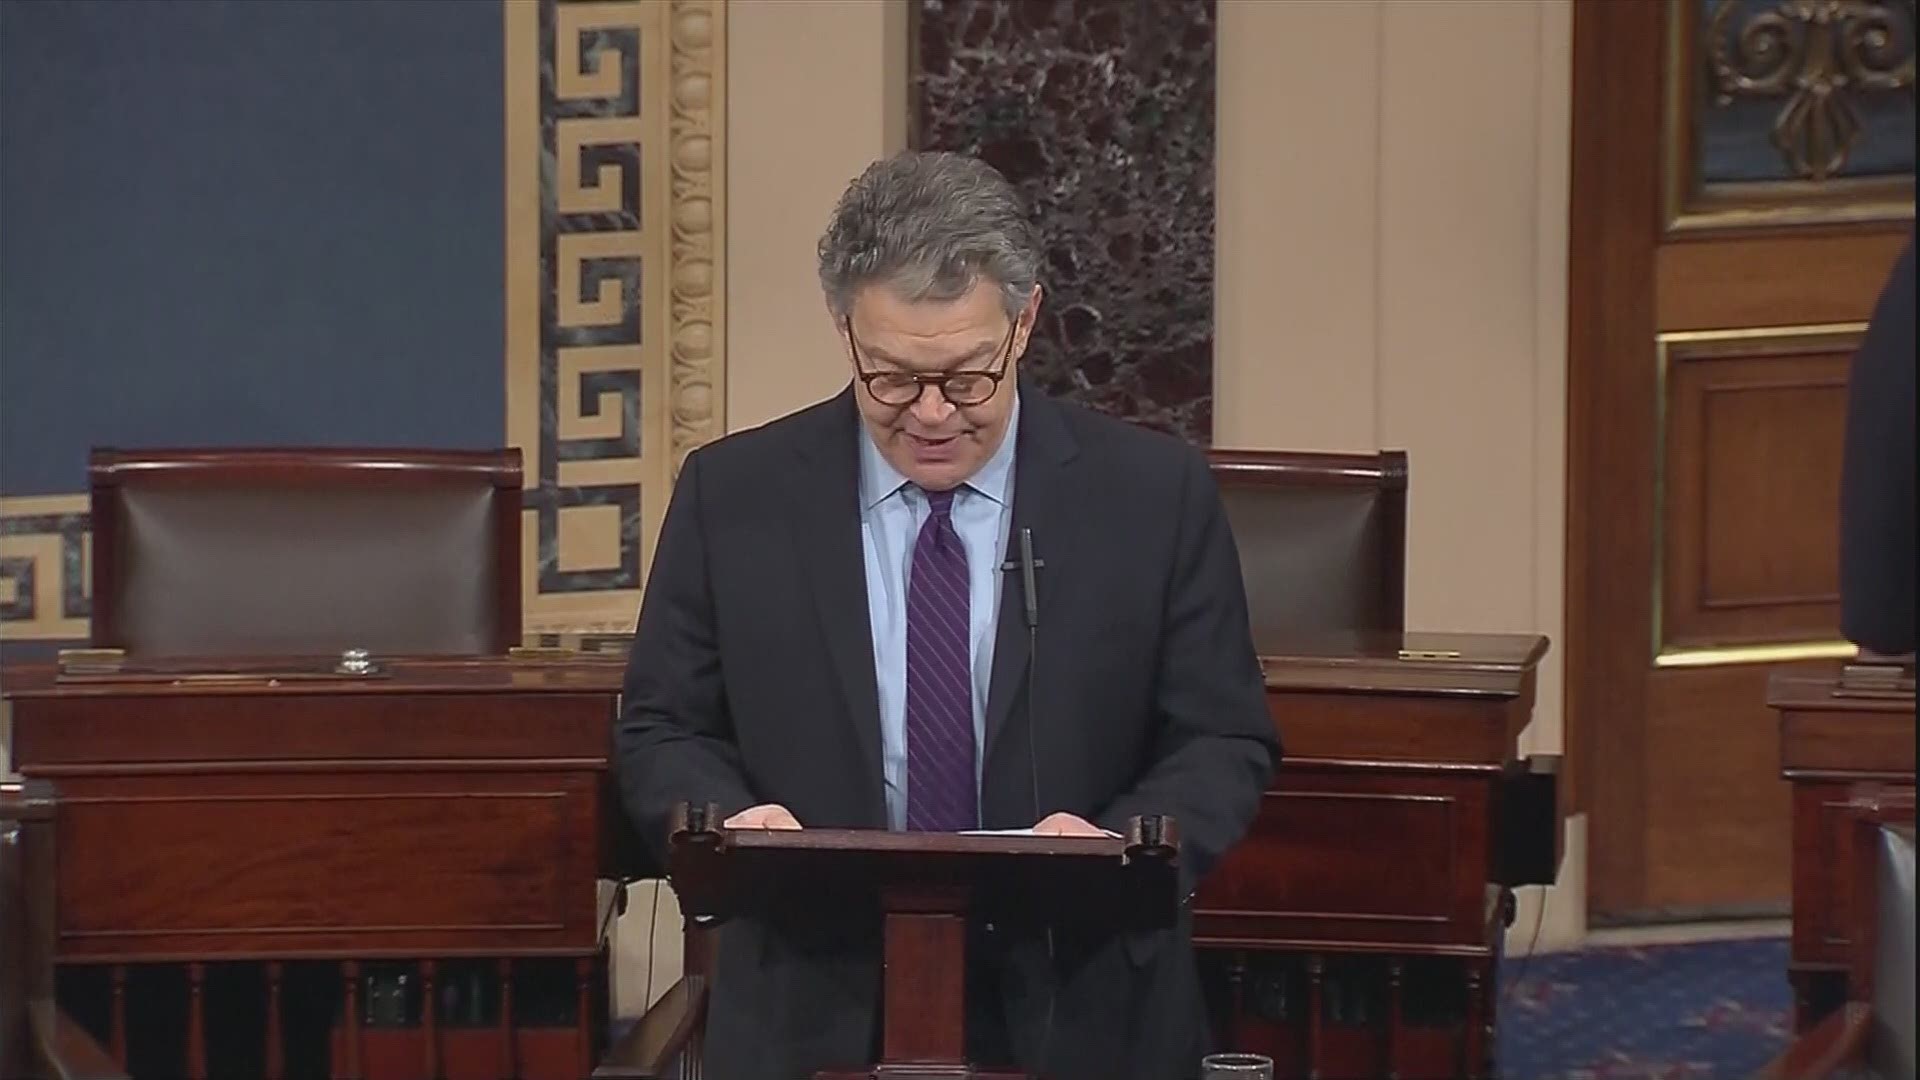 Flatly denying some of the allegations against him while saying he recalled situations with his accusers differently, Senator Al Franken nonetheless announced that he will resign within the coming weeks.